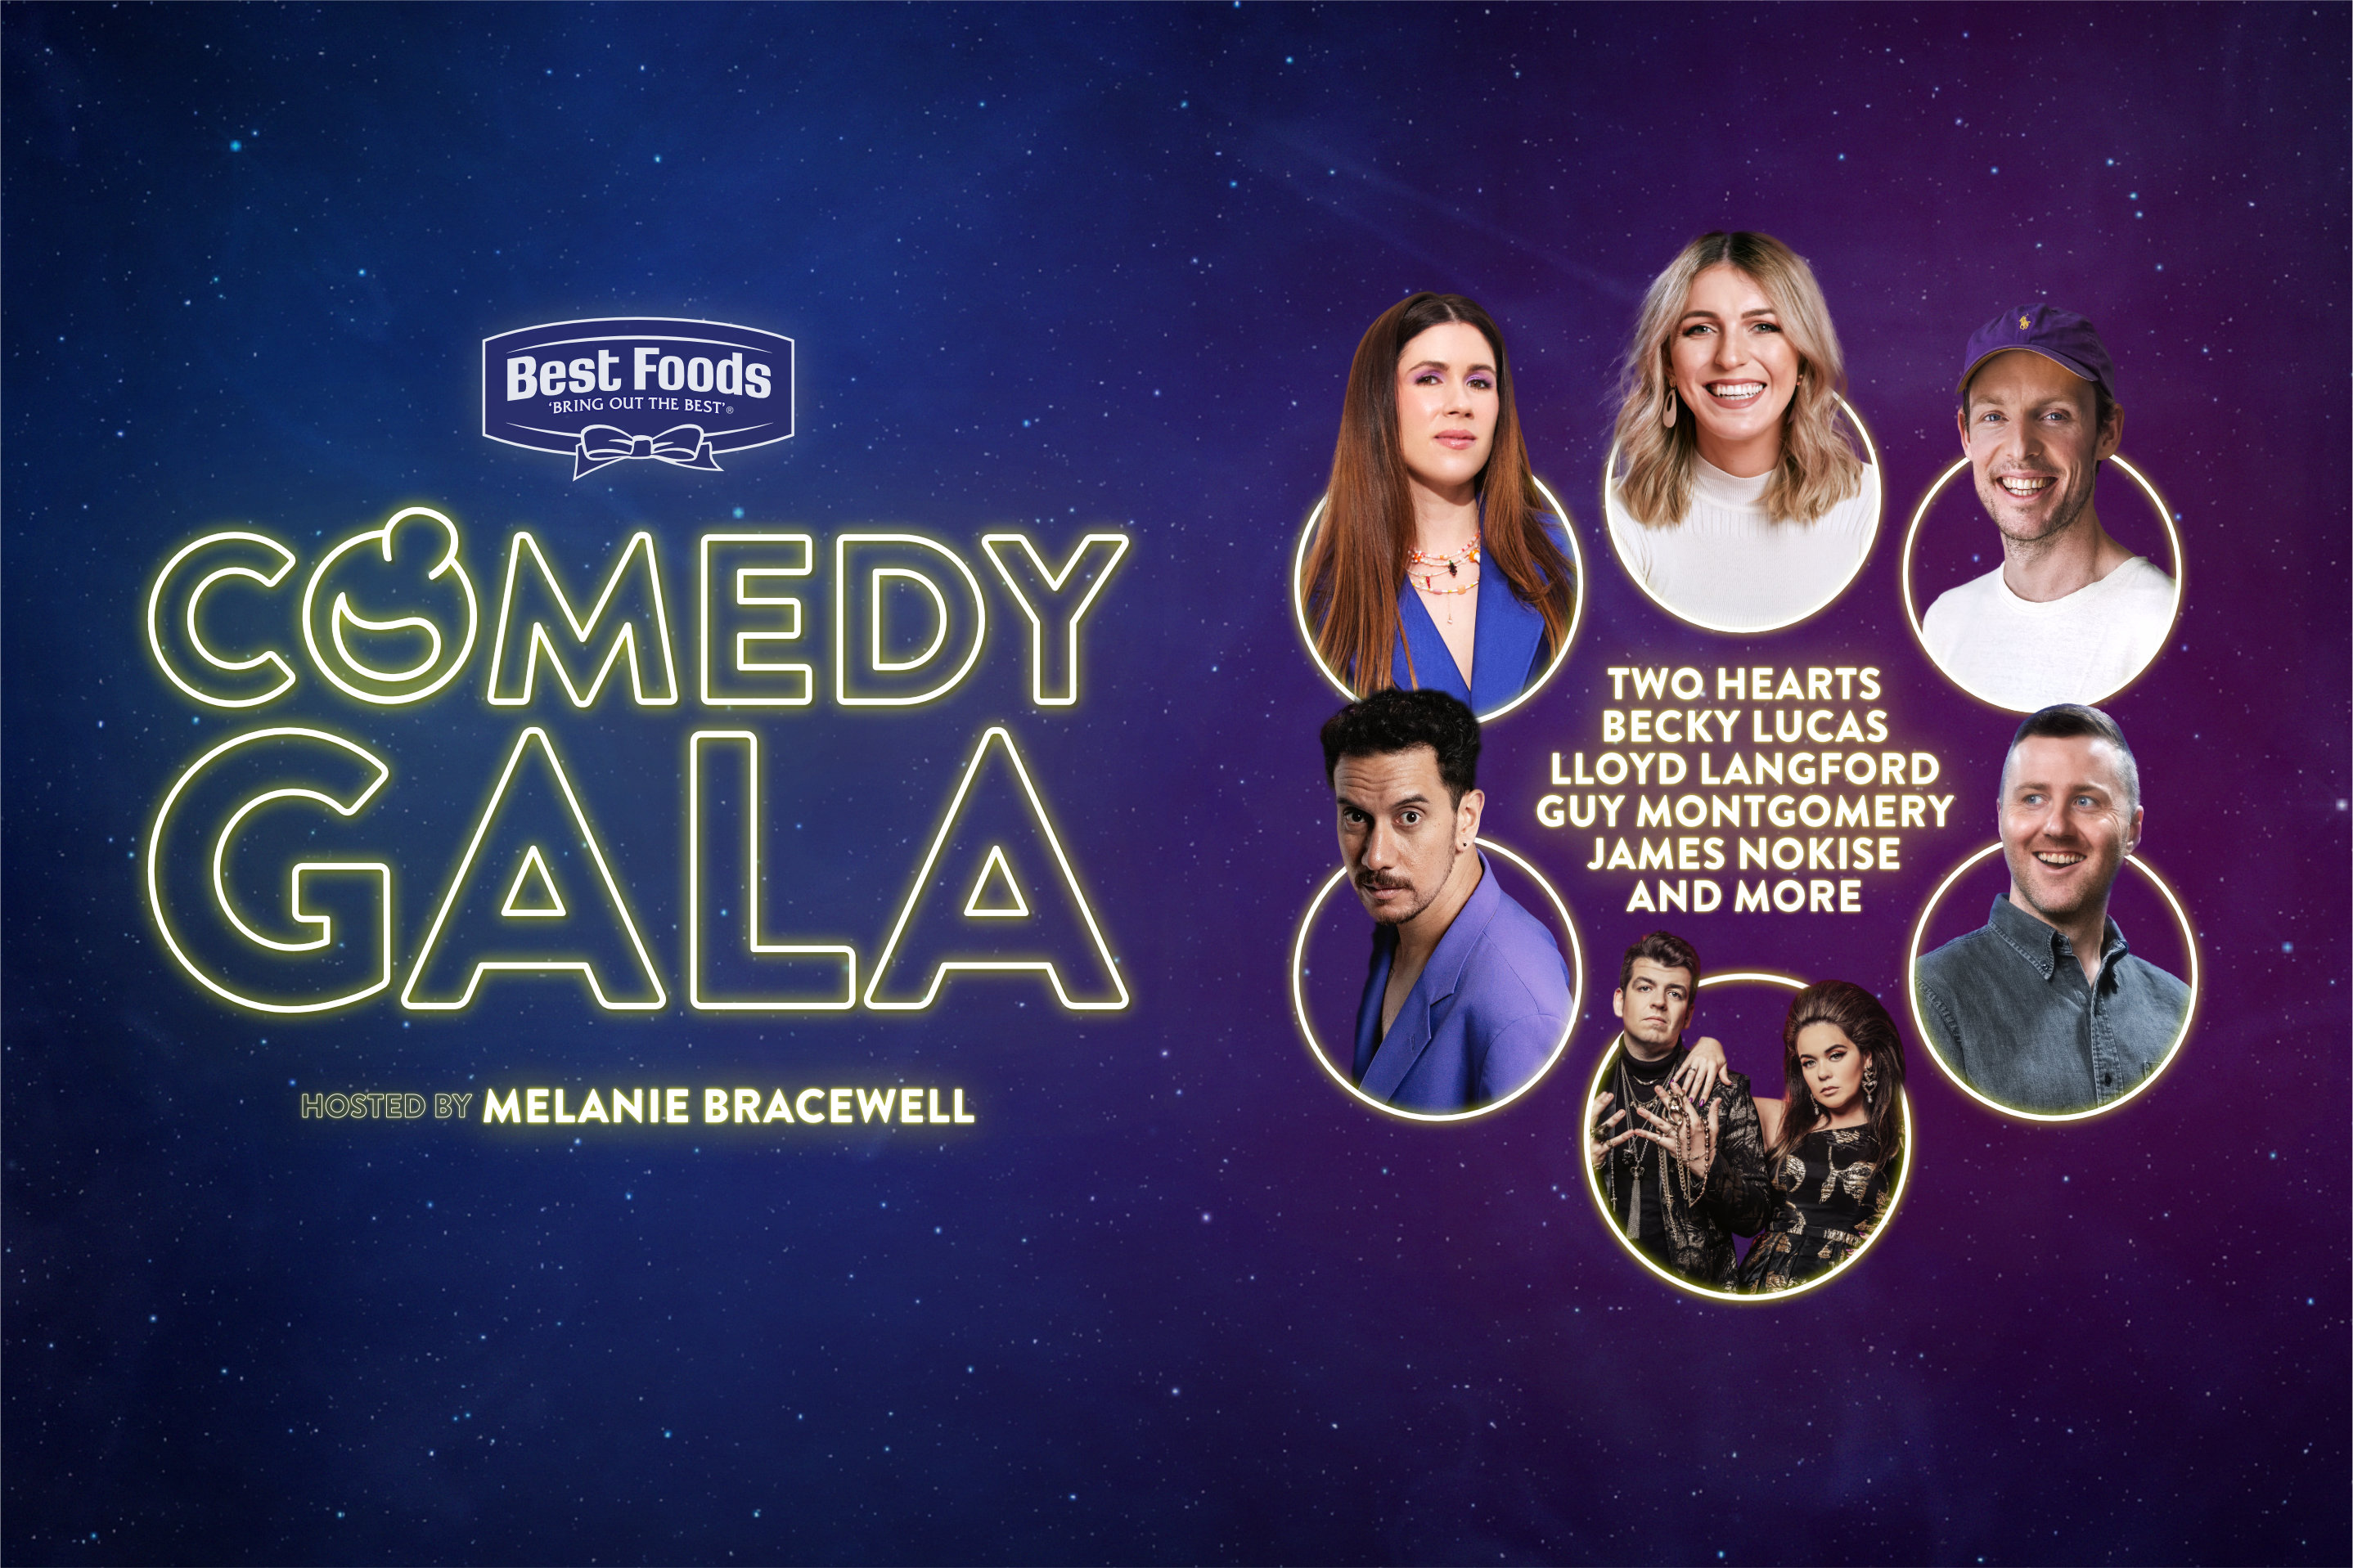 Full line-up announced for 2023 Best Foods Comedy Gala!